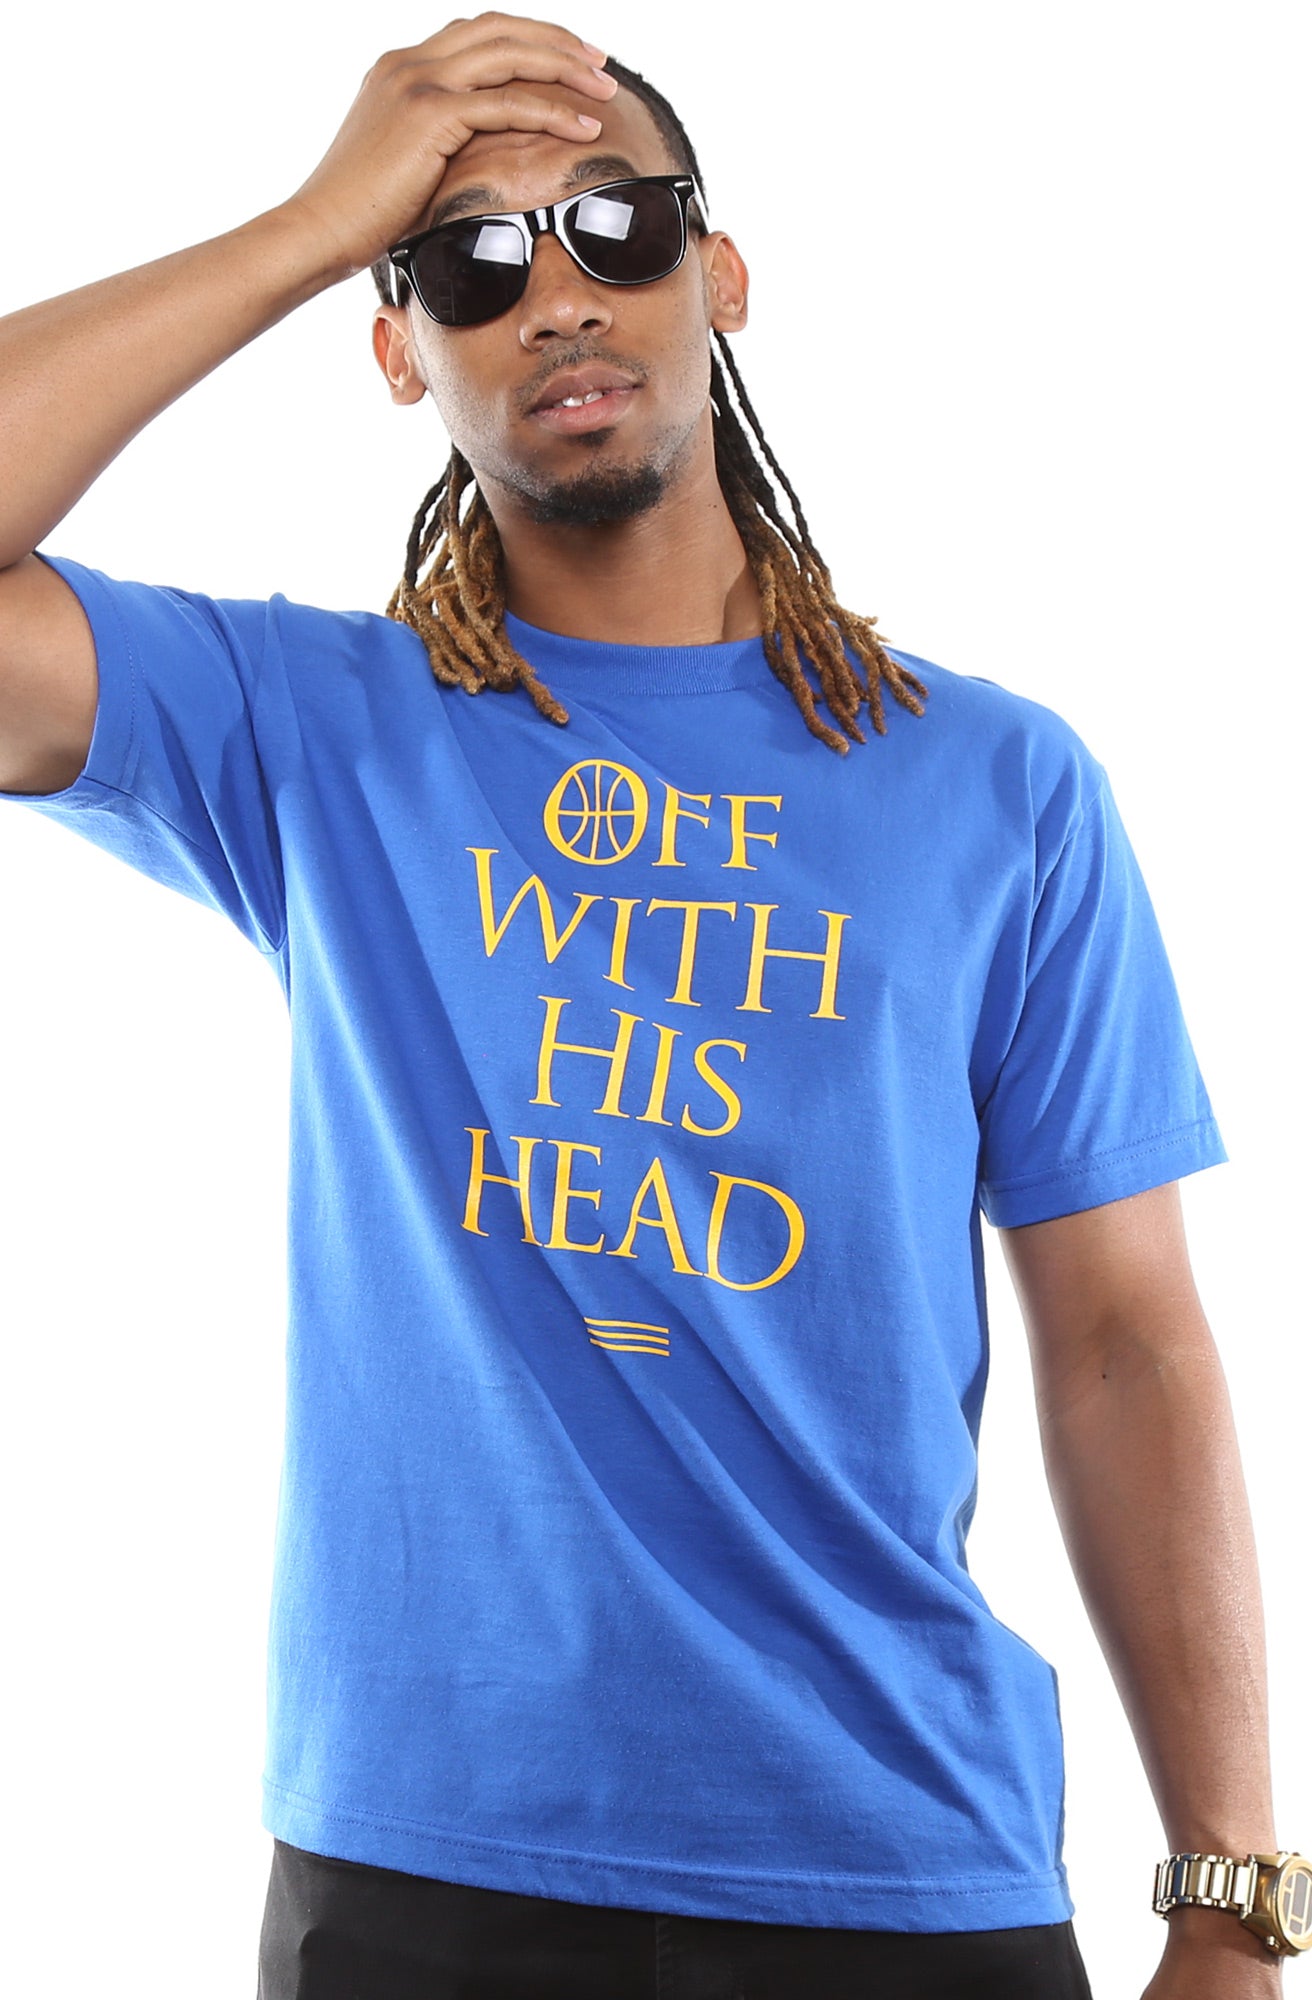 Off With His Head (Men's Royal Tee)